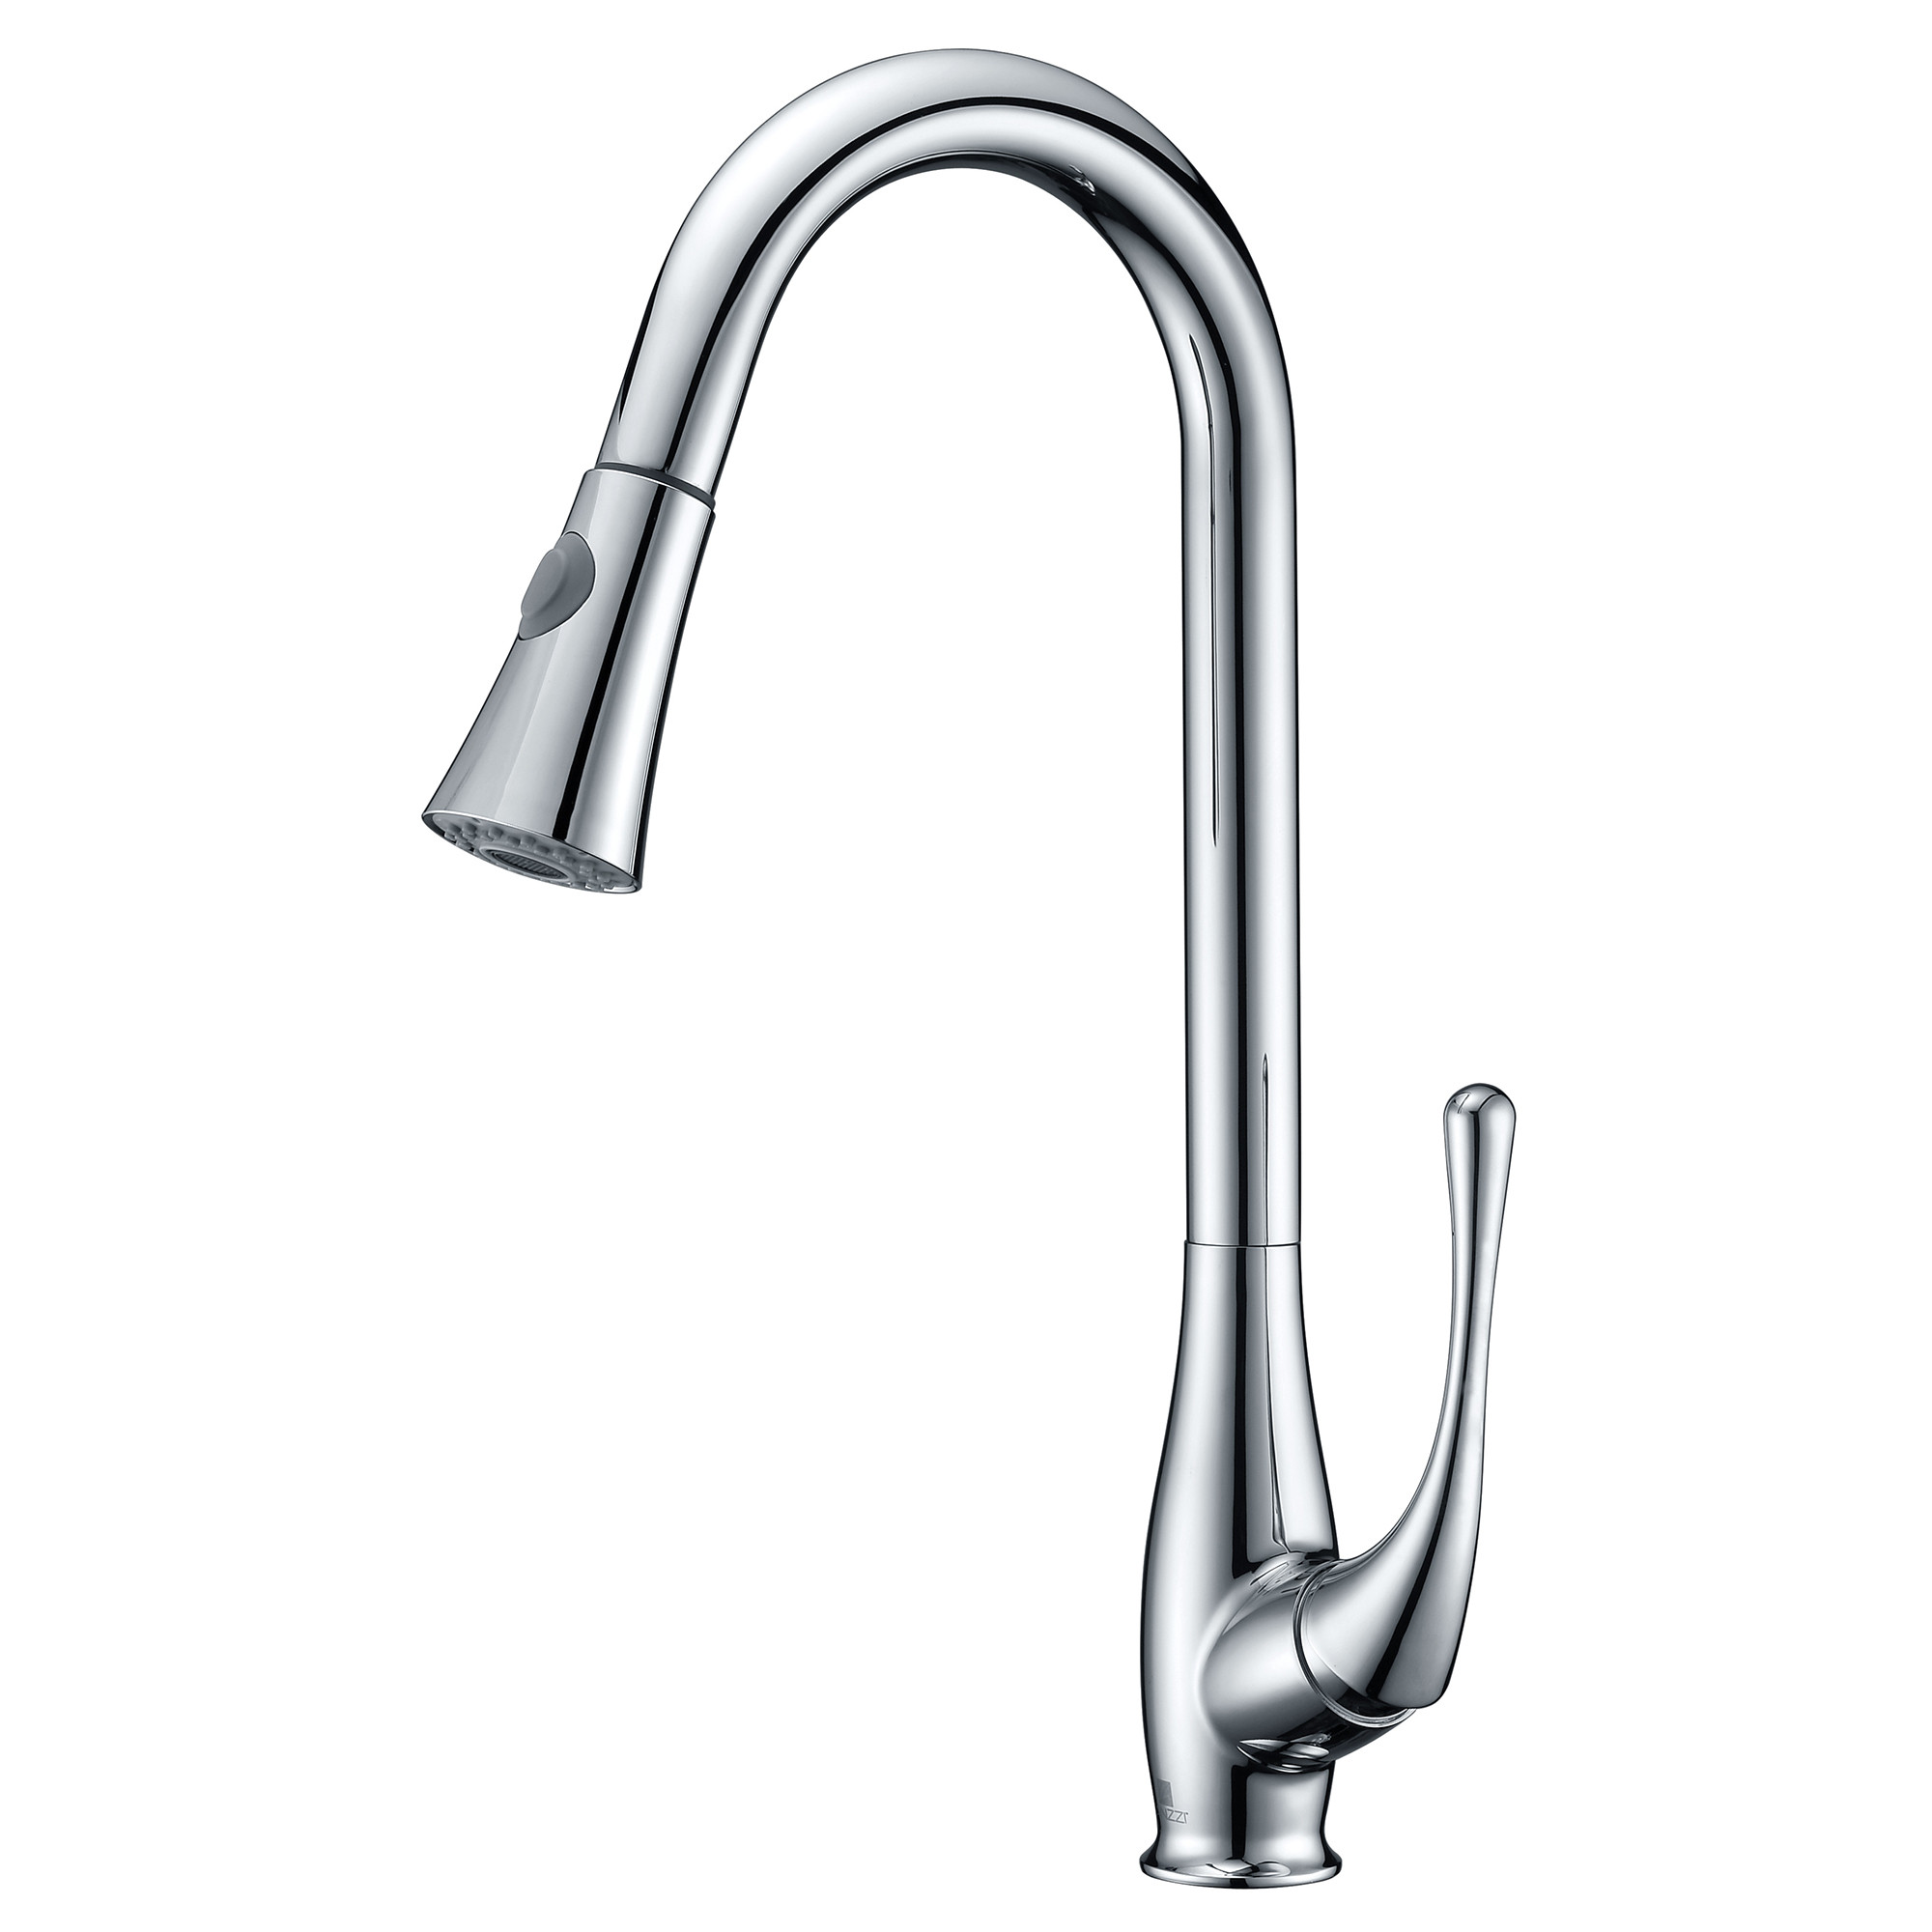 ANZZI KF-AZ041 Singer Pull Down Spray Kitchen Faucet In Polished Chrome